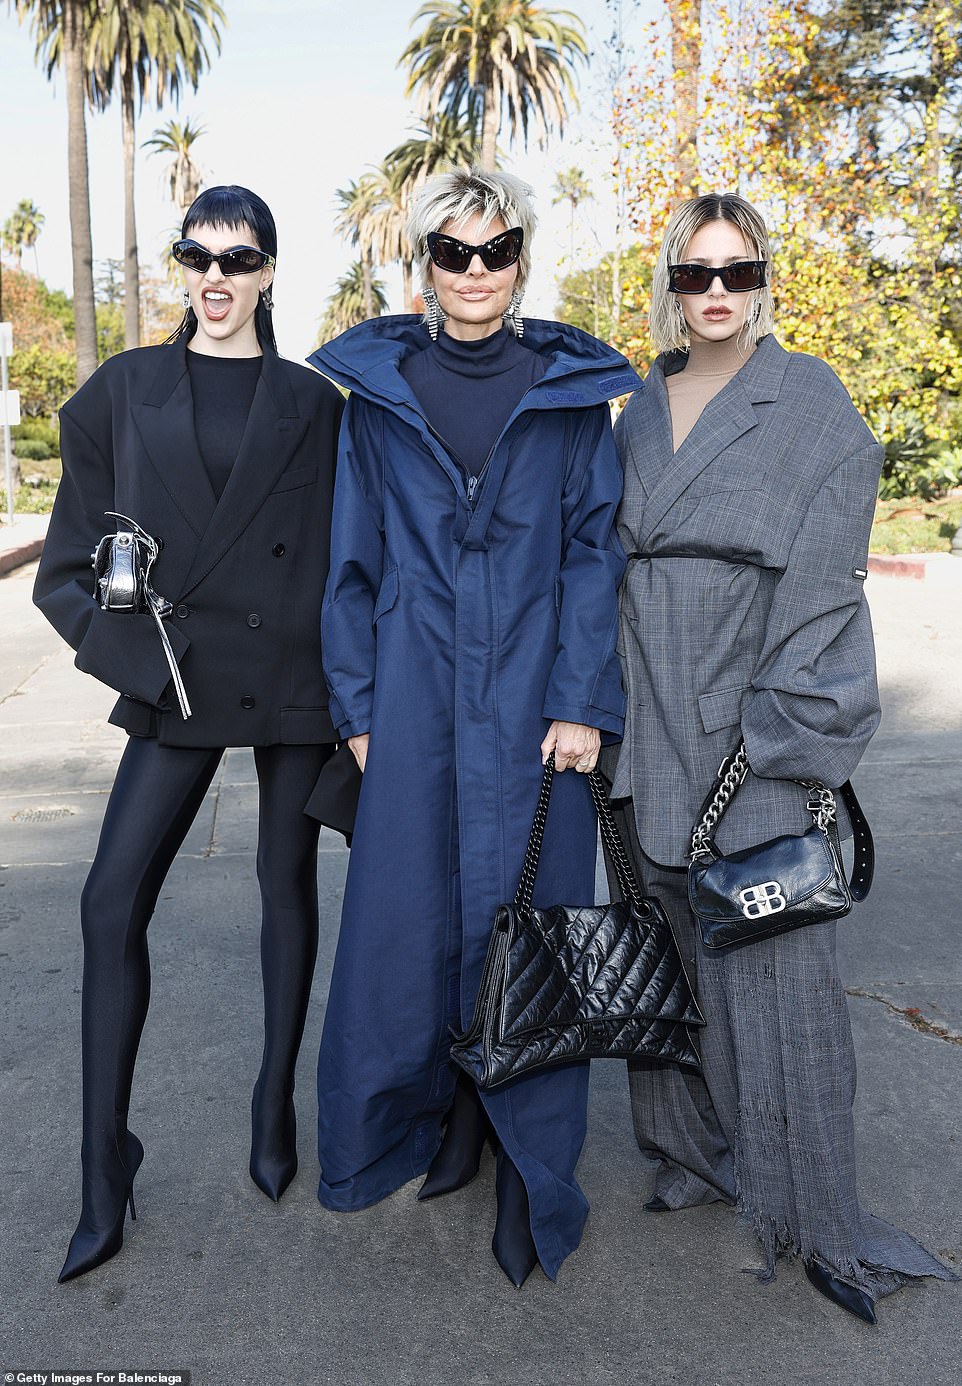 The Balenciaga fashion show was a family affair for Lisa Rinna, 60, who made an appearance with her daughters Amelia Gray Hamlin, 22, and Delilah Belle Hamlin, 25